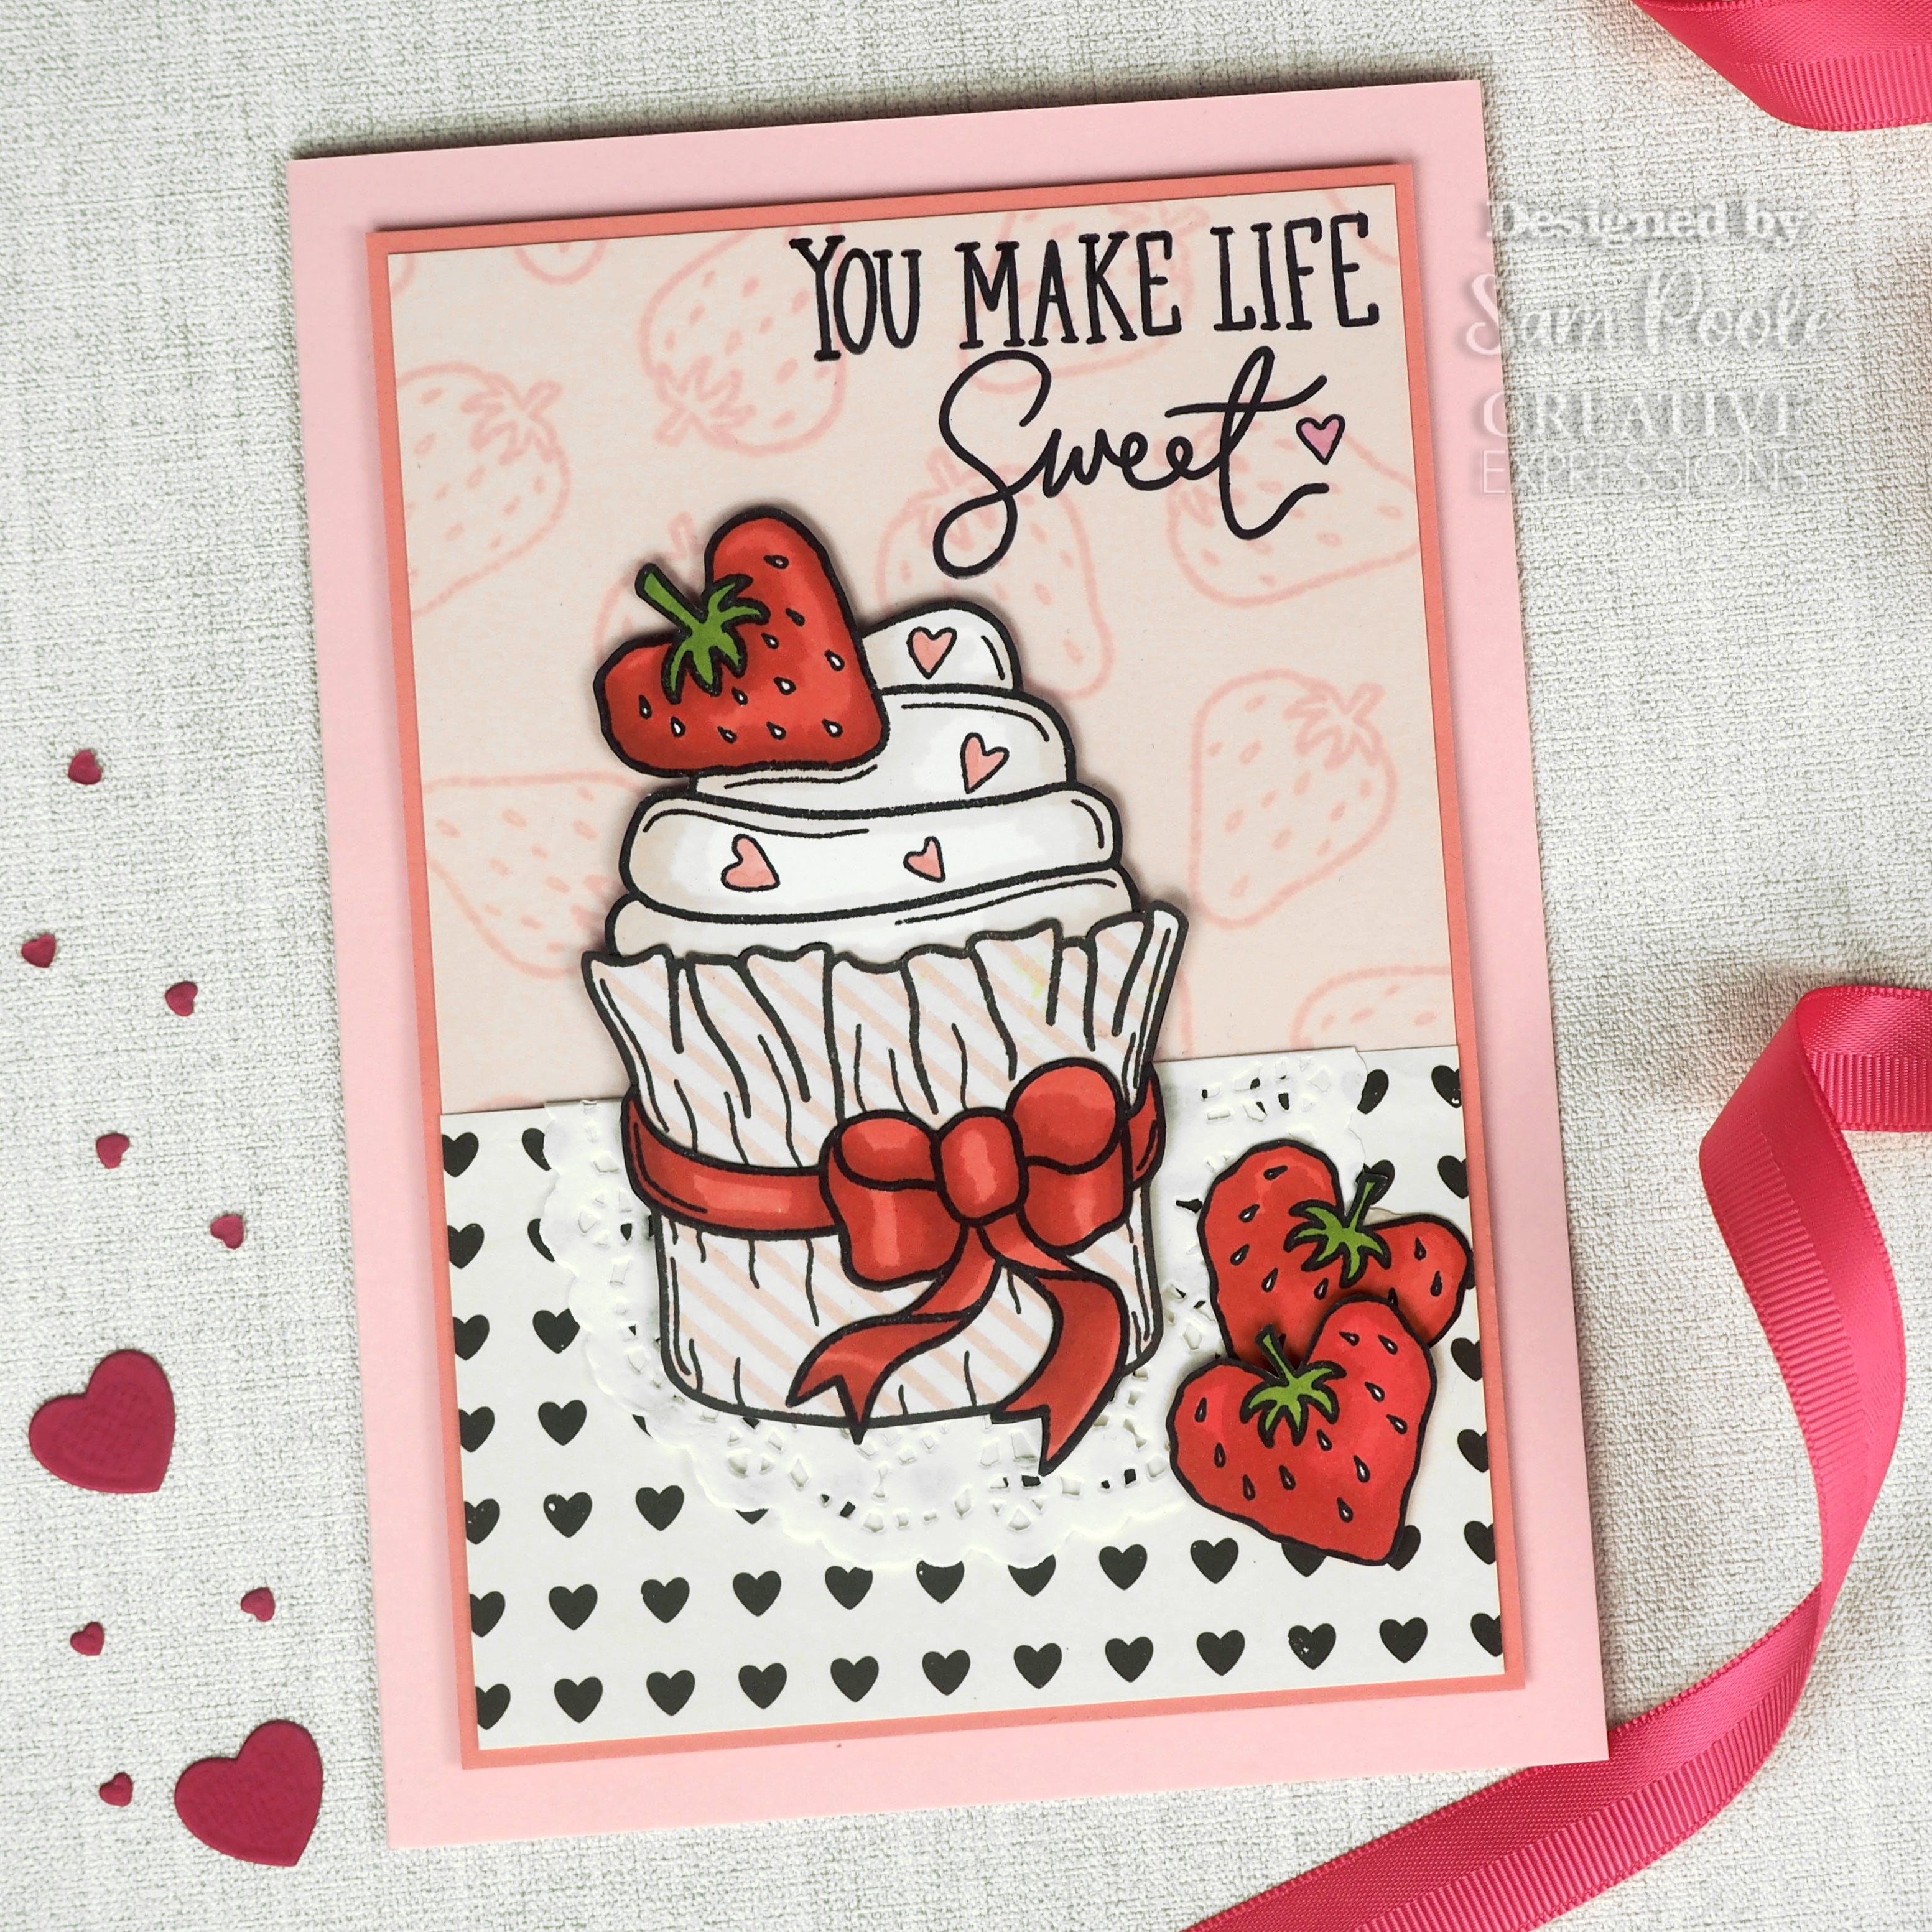 Creative Expressions Sam Poole Cupcake Kisses 6 in x 4 in Clear Stamp Set